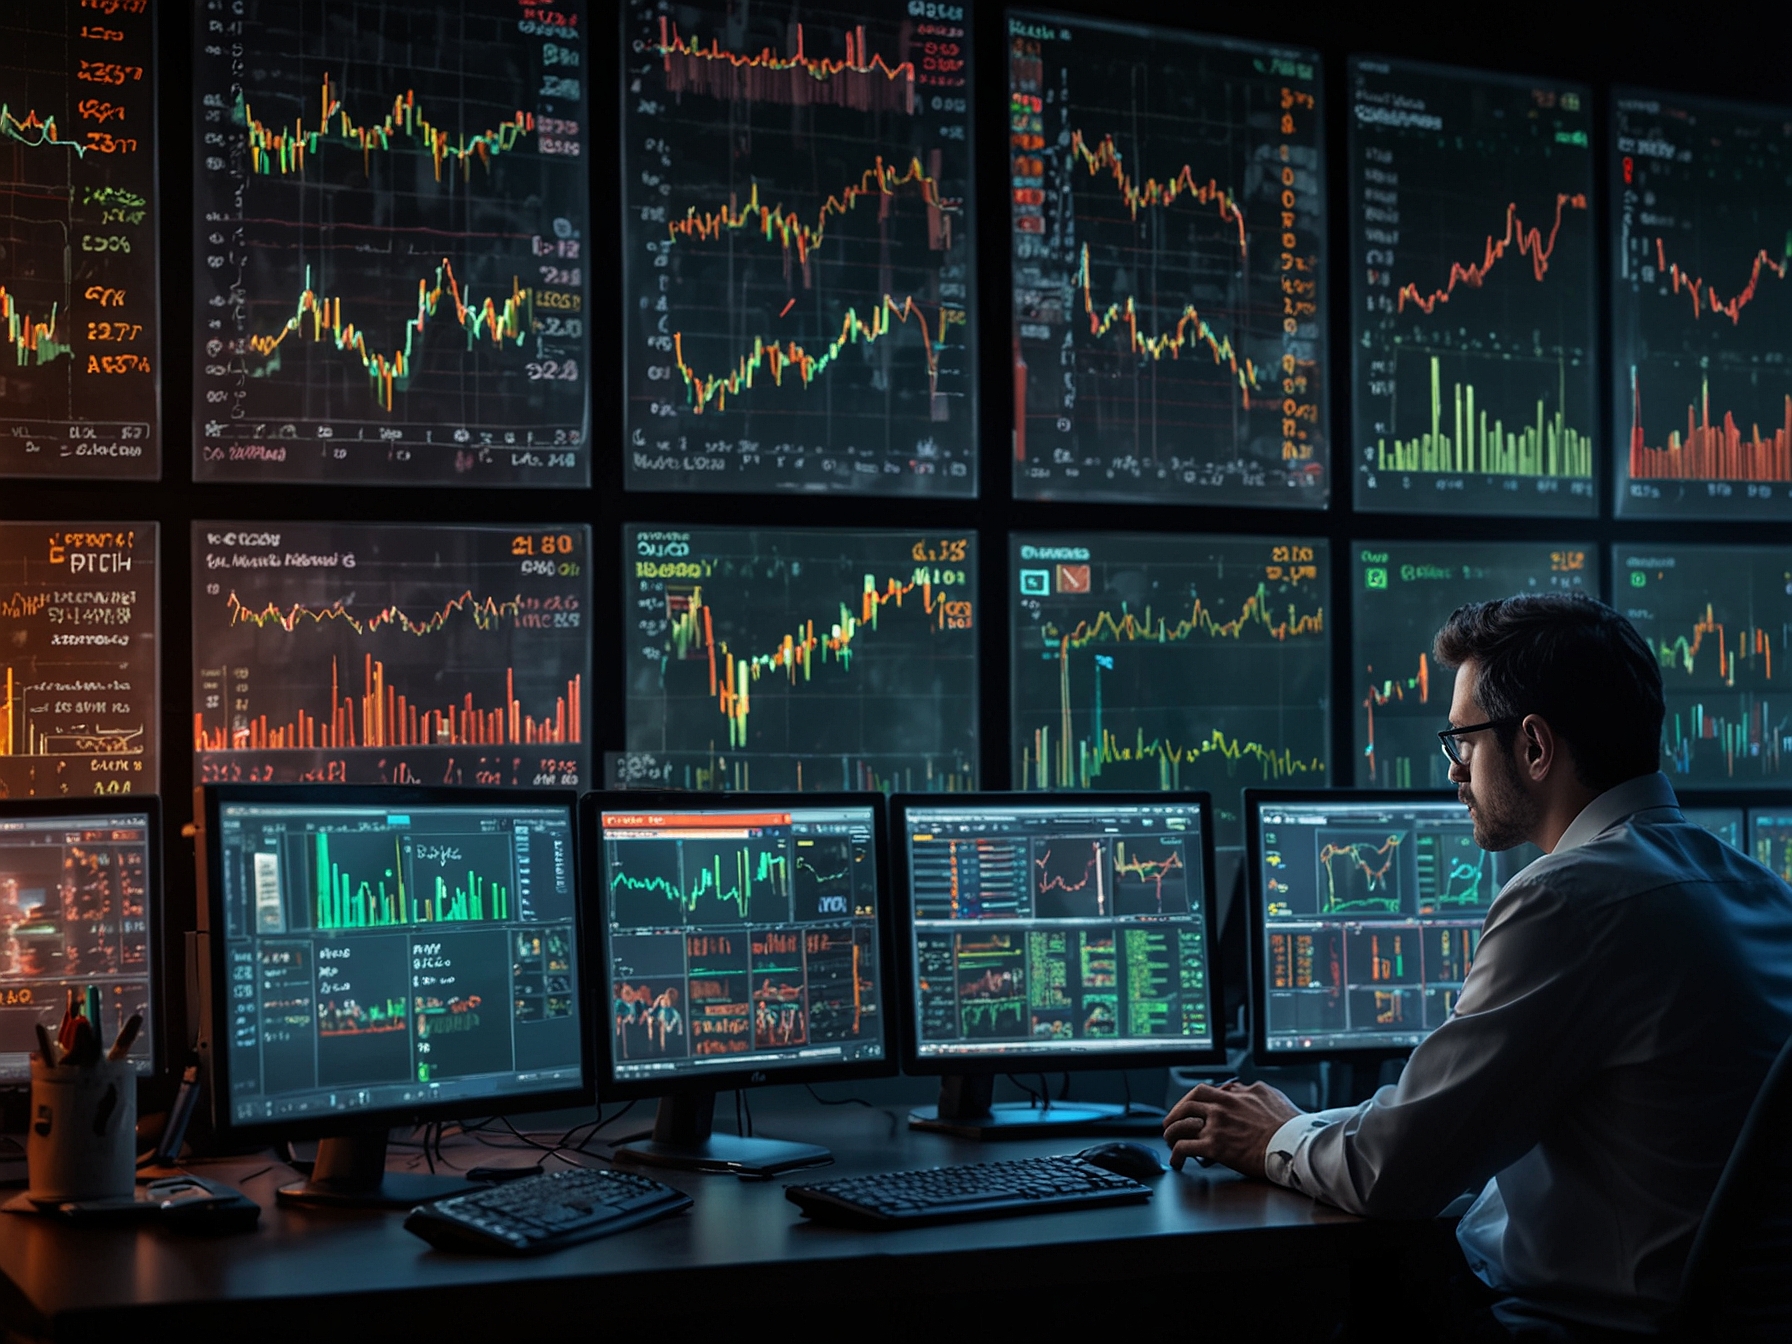 An investor closely monitoring stock trading data on multiple screens, highlighting the vigilant approach retail traders should take by following 'smart money' movements in the market.